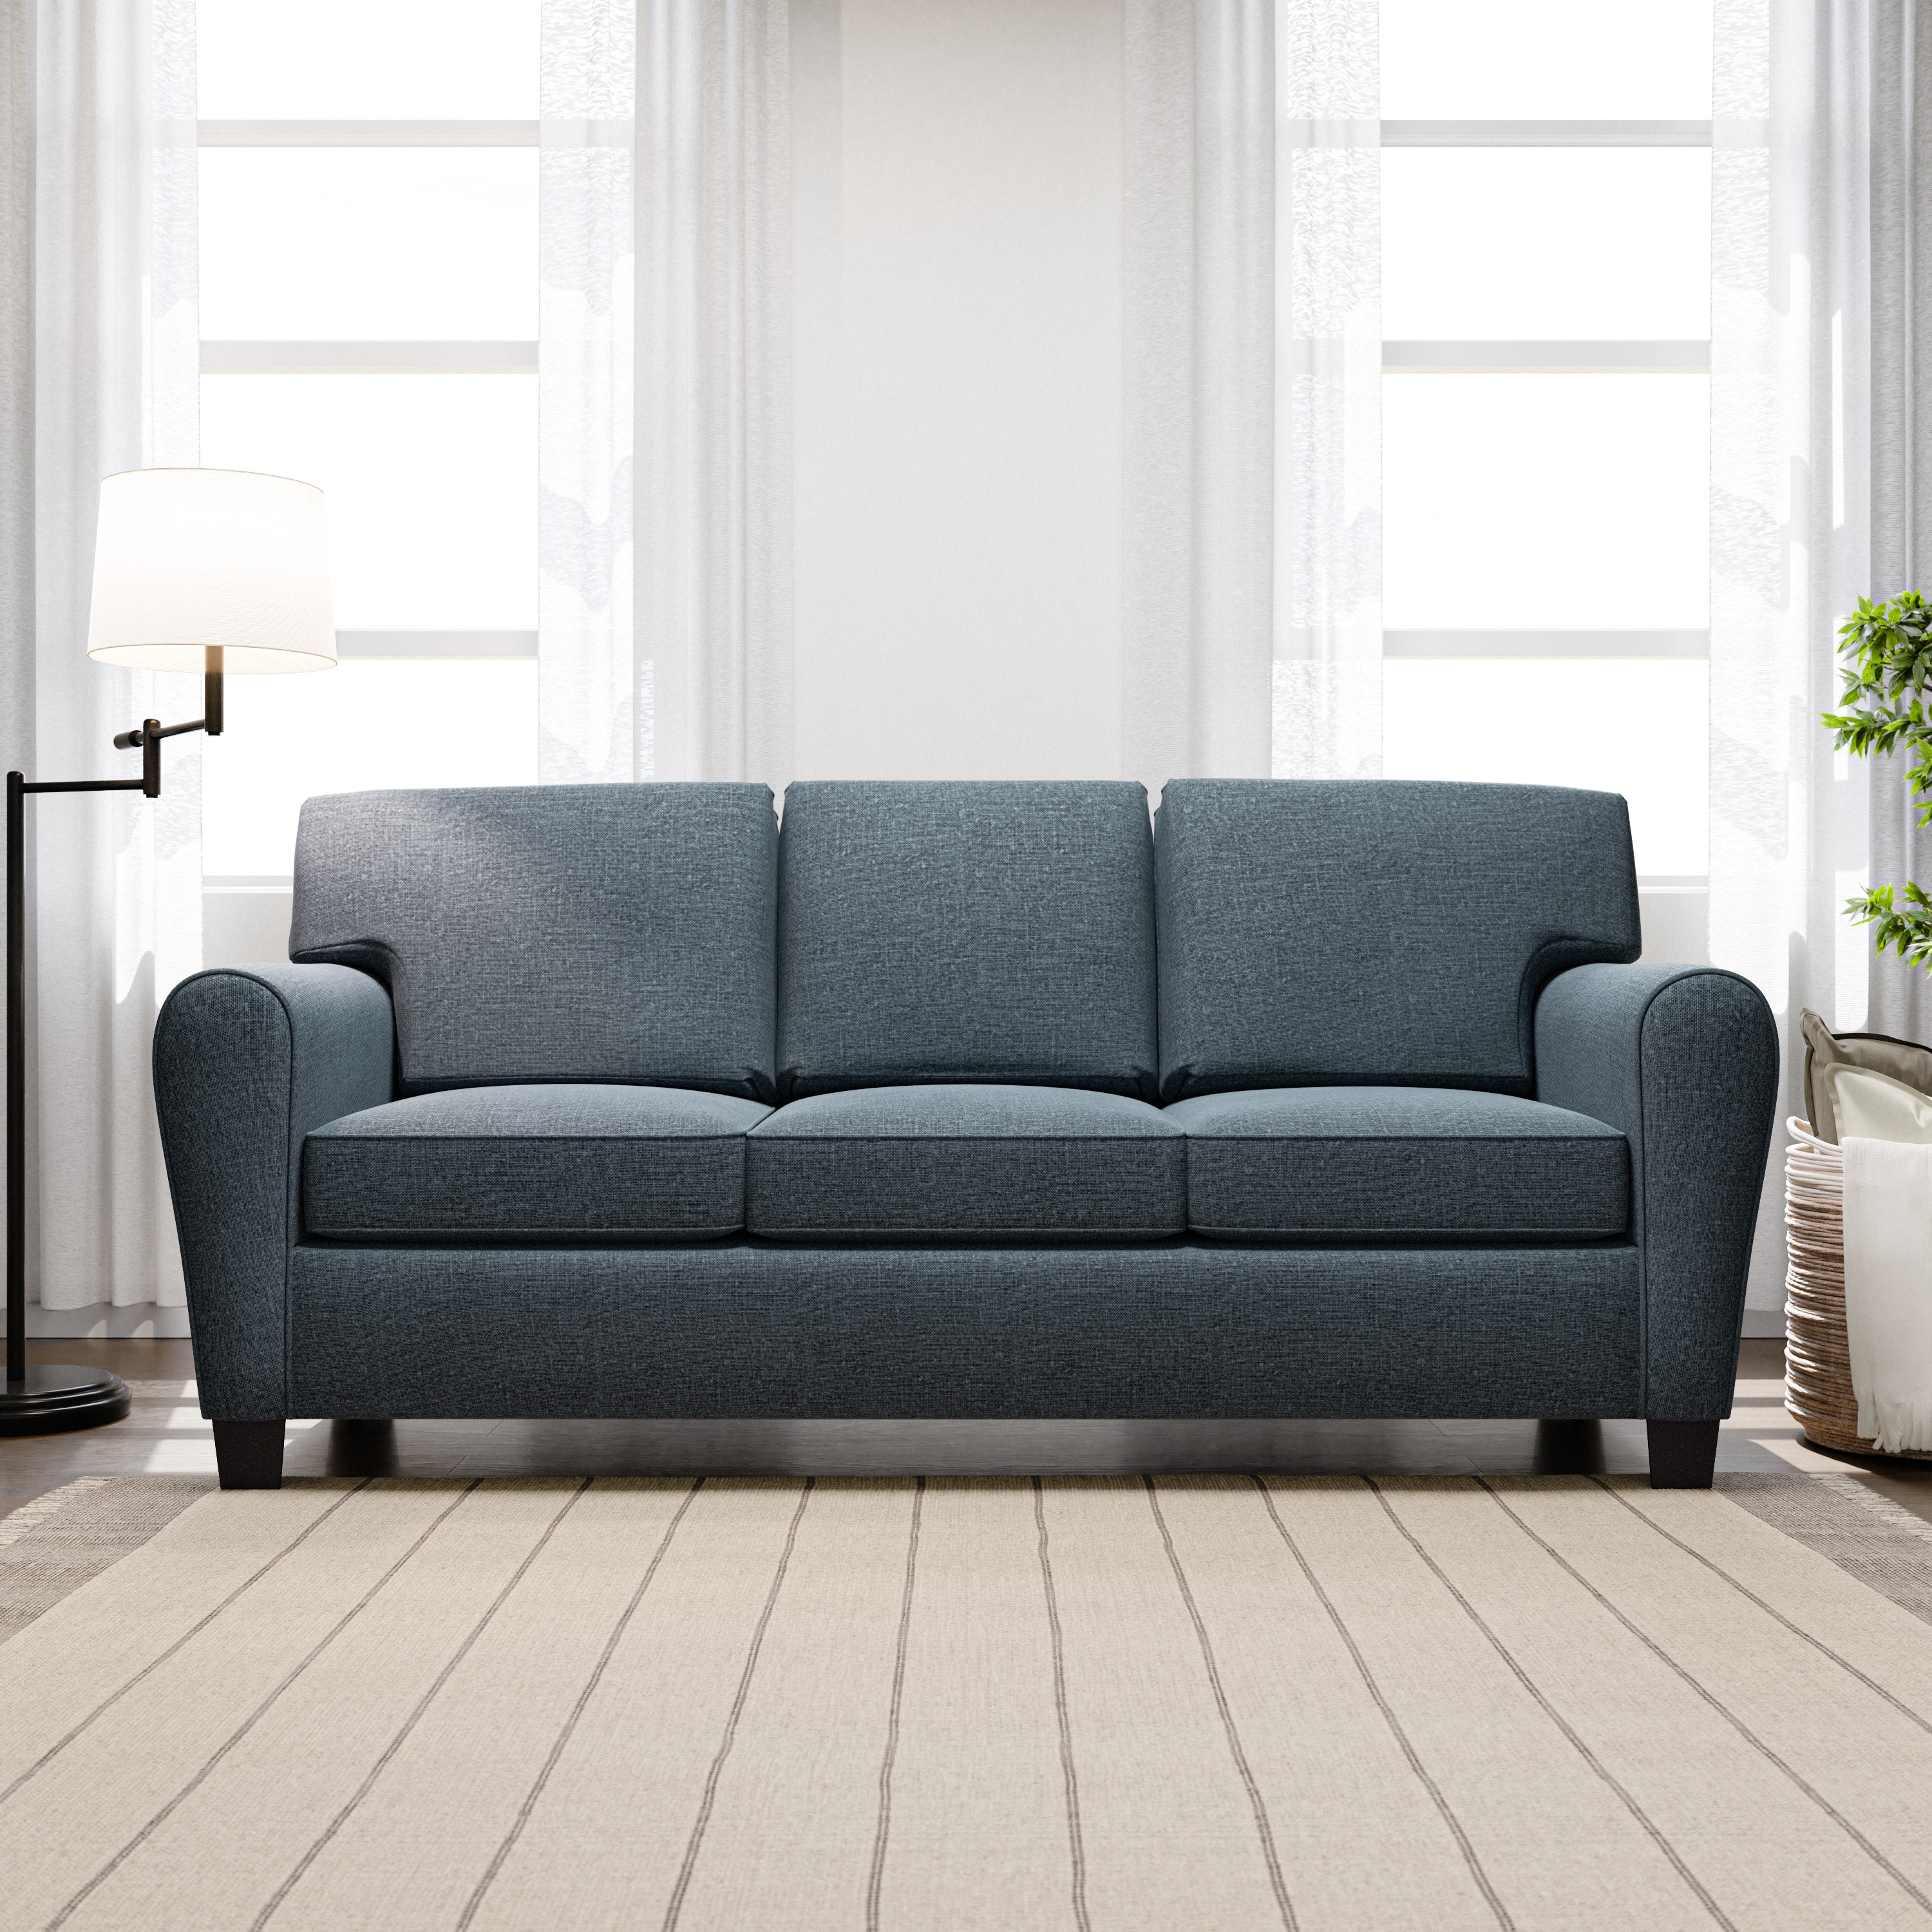 Brookside Abby Casual Navy Polyester/Blend Sofa in Blue | BS0004SOF00NV